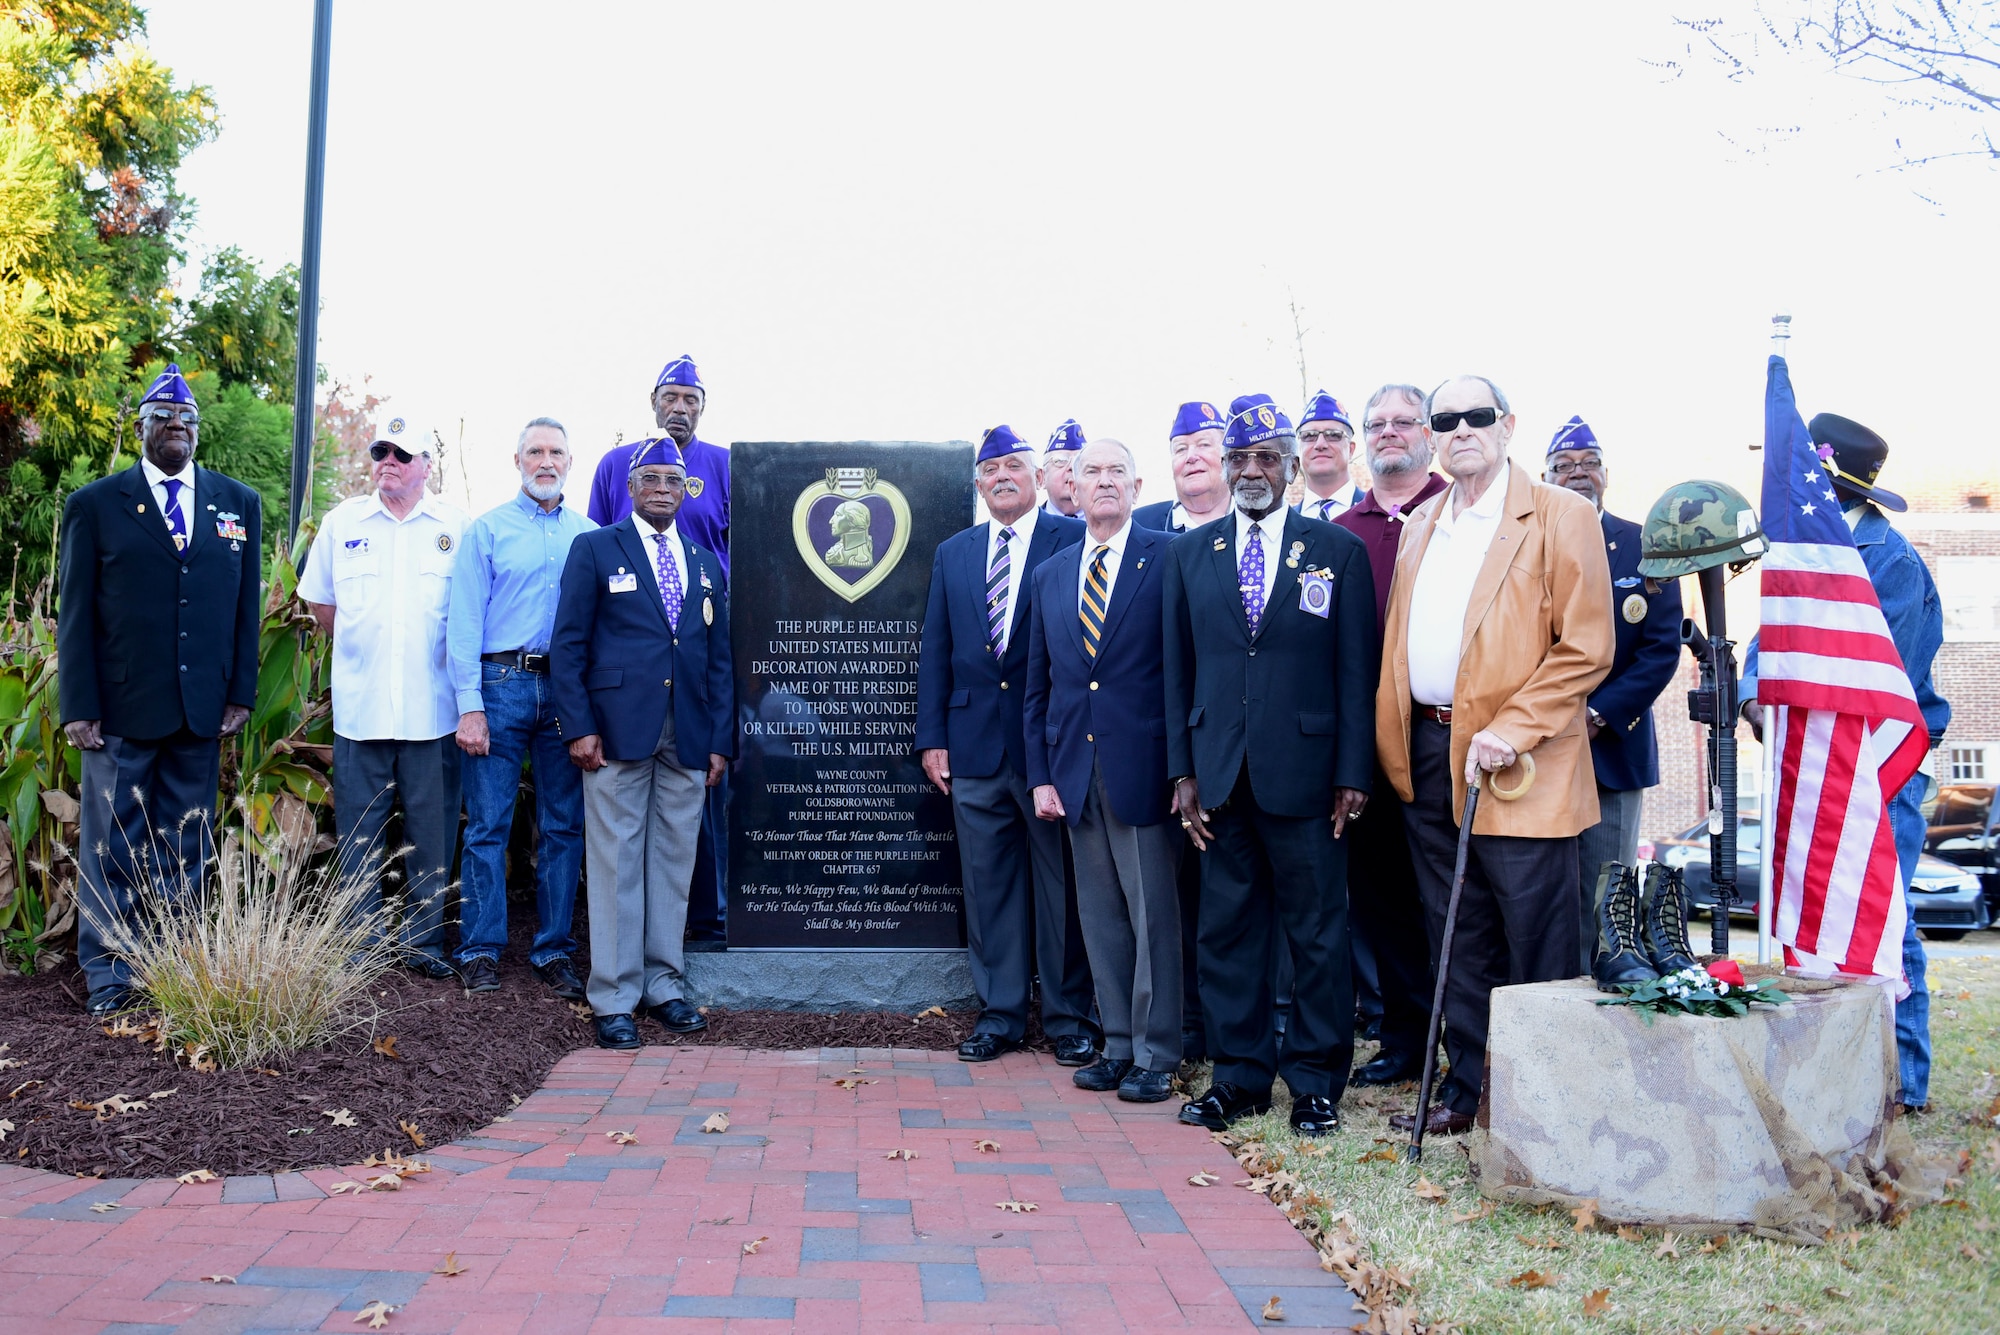 Recipients of the Purple Heart medal gather in front of the newly unveiled Purple Heart memorial Nov. 29, 2017, at the Wayne County Veteran’s Memorial, Goldsboro, North Carolina.